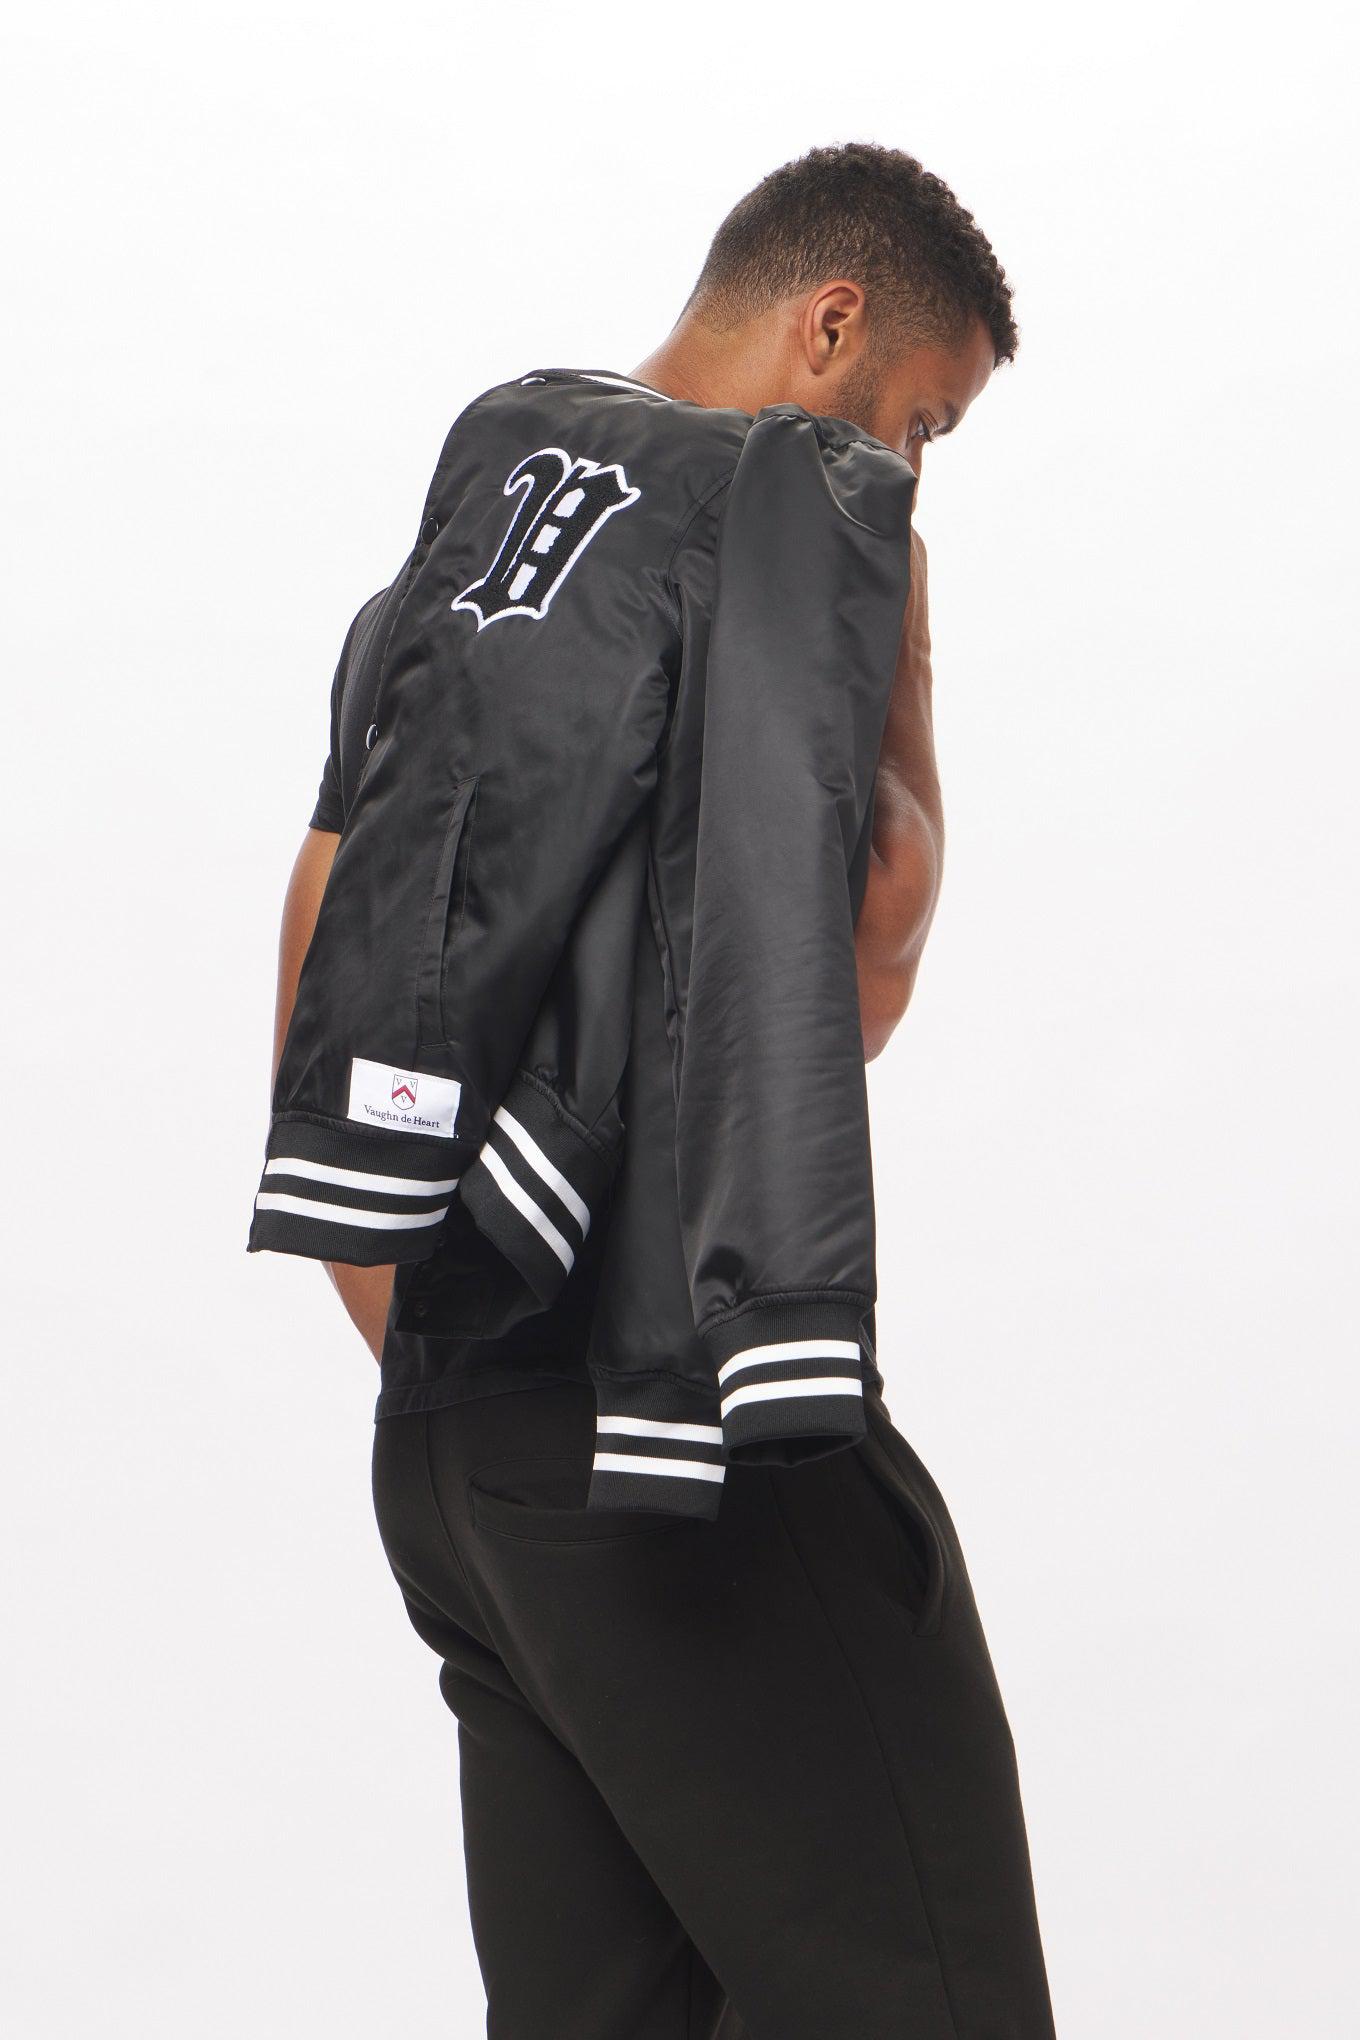 Custom Grey and Black Leather Varsity Letterman Jacket With “Pop Savvee  Clothing” Chenille Embroidery